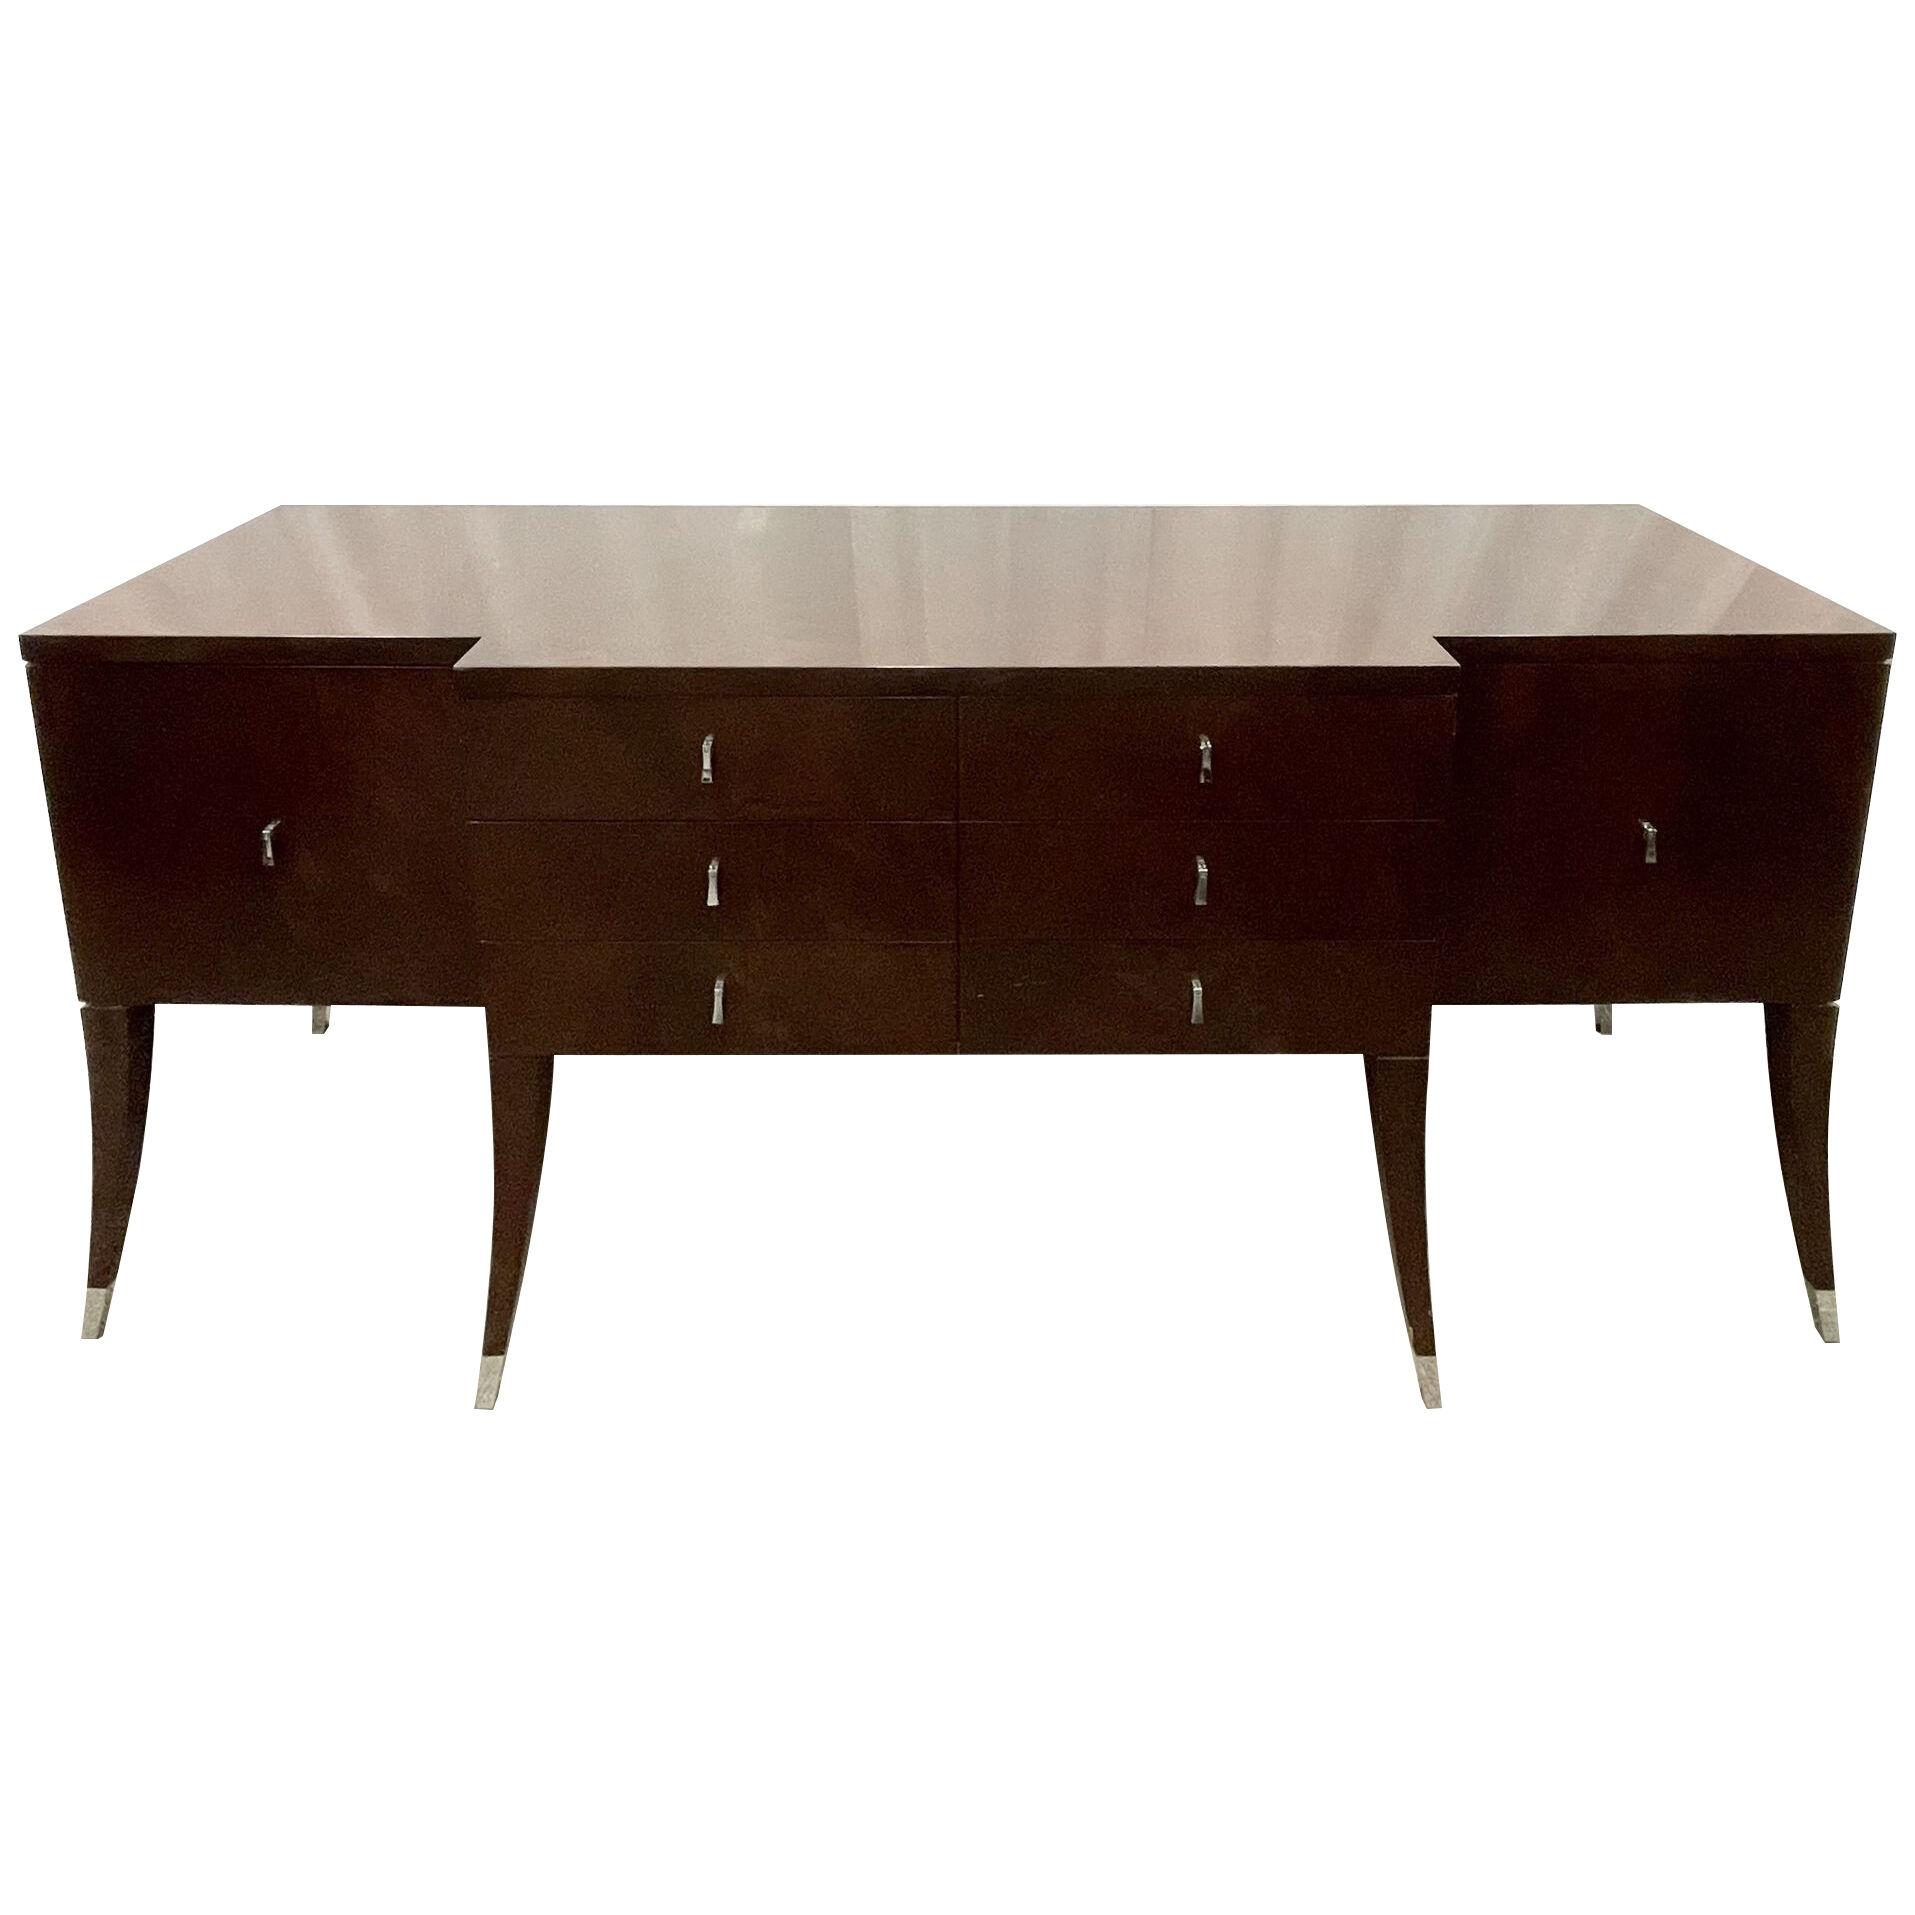 A Flame Mahogany Sideboard, Buffet or Credenza by Decca for Bolier